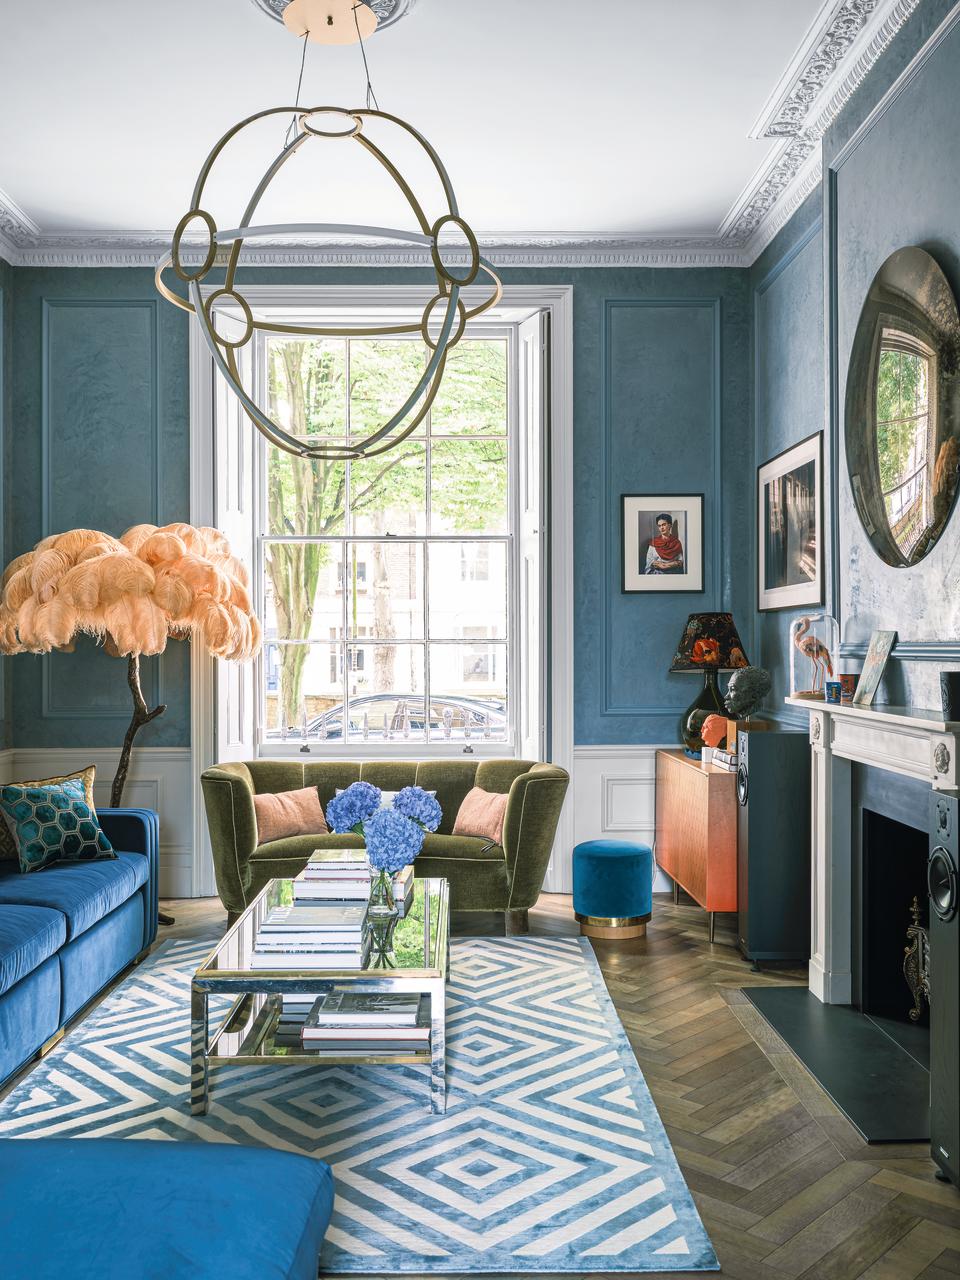 A living room painted blue with a large sash window